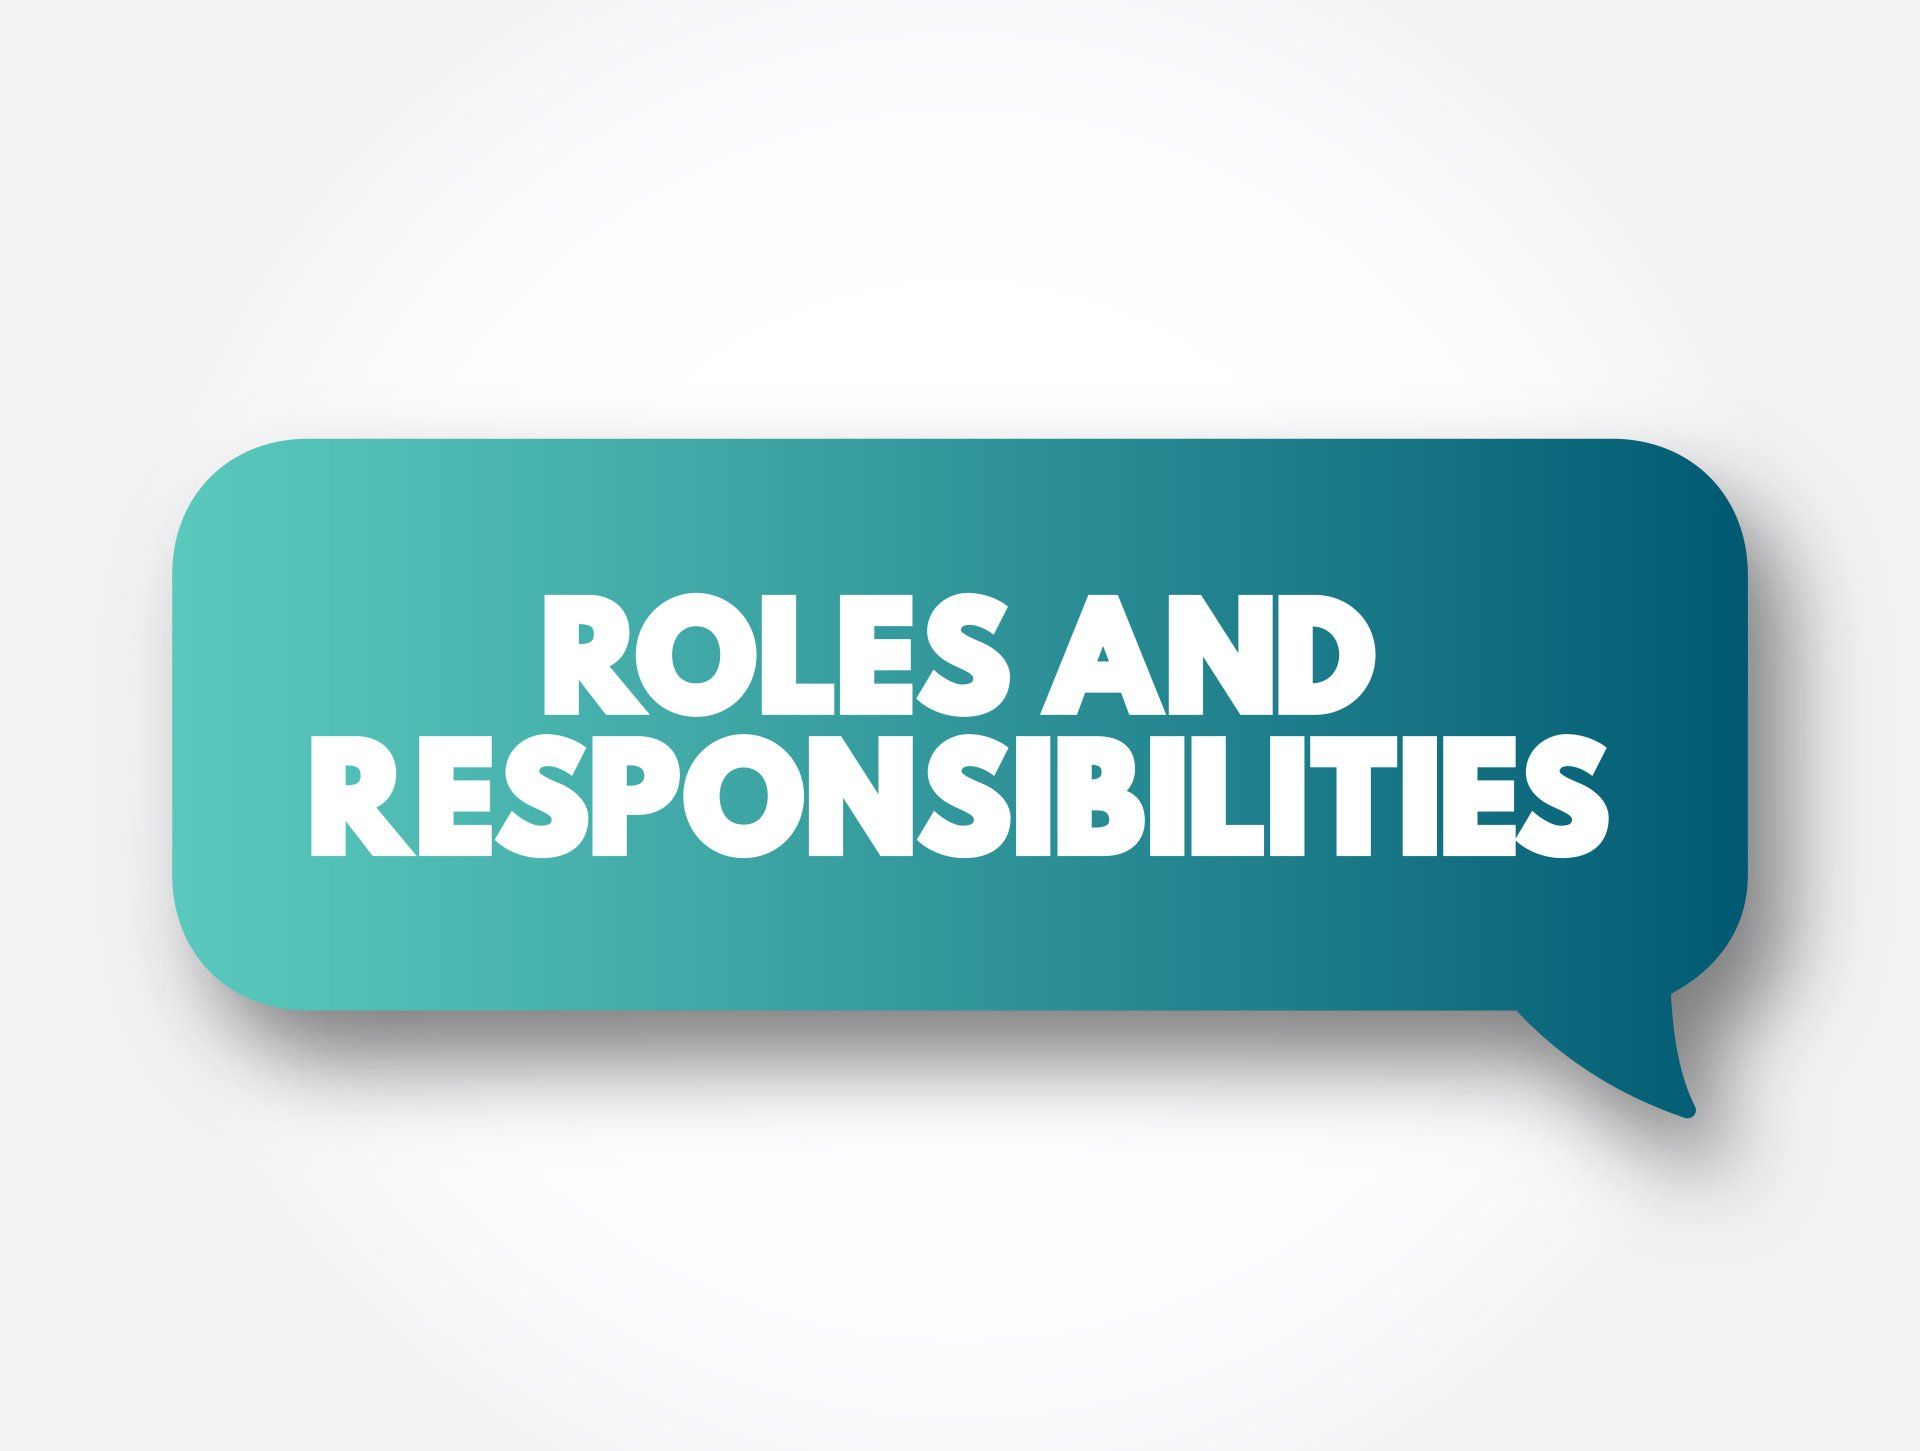 a blue speech bubble with the words `` roles and responsibilities '' written on it .